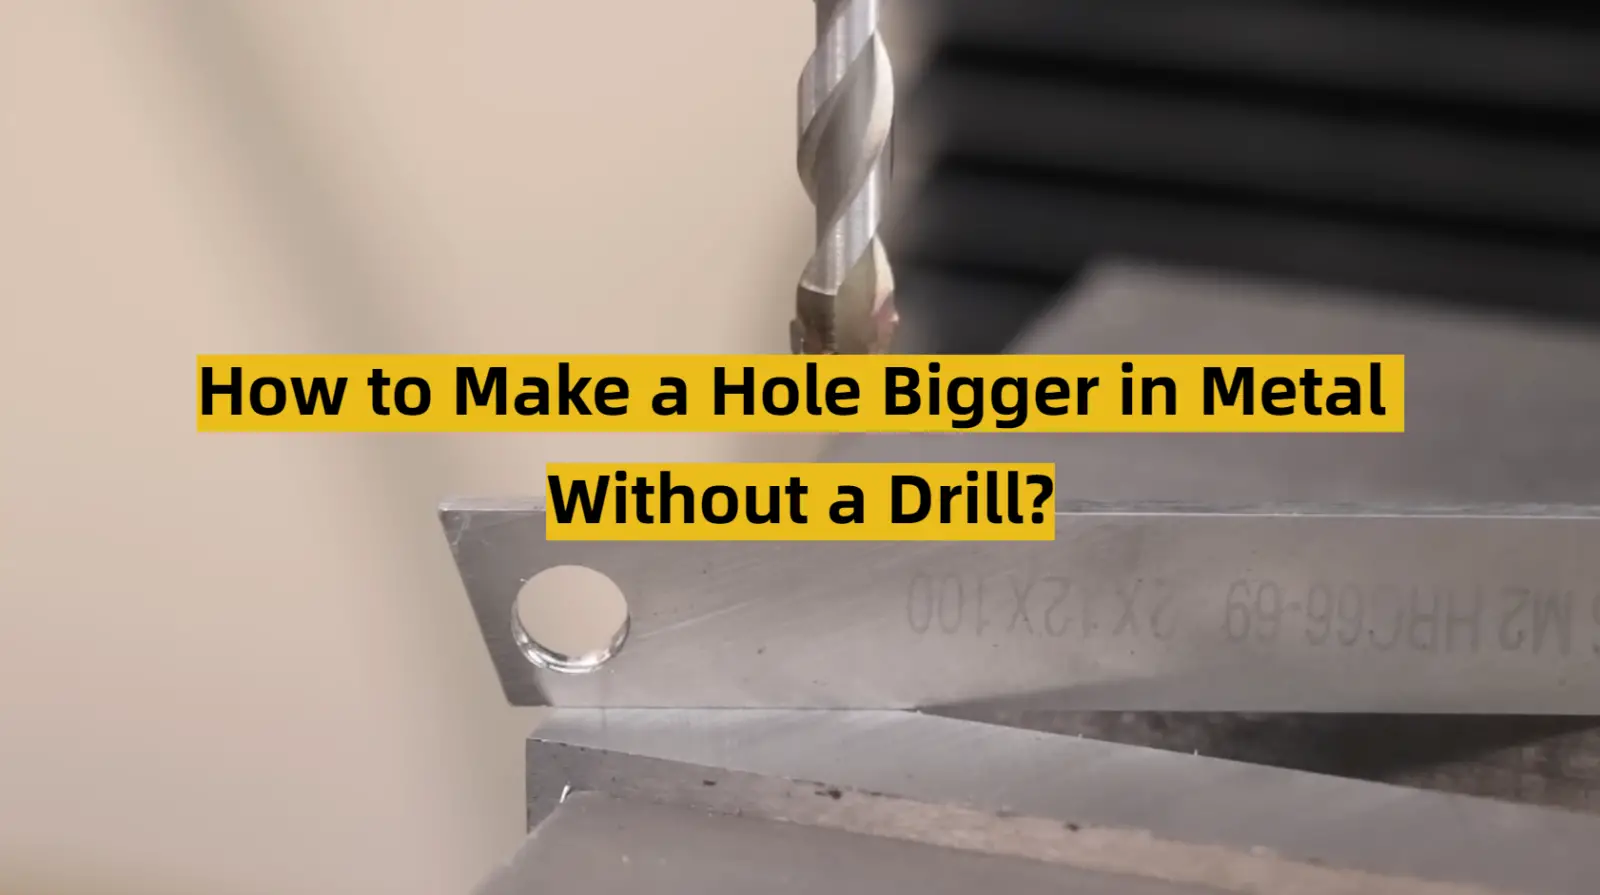 How to Make a Hole Bigger in Metal Without a Drill?